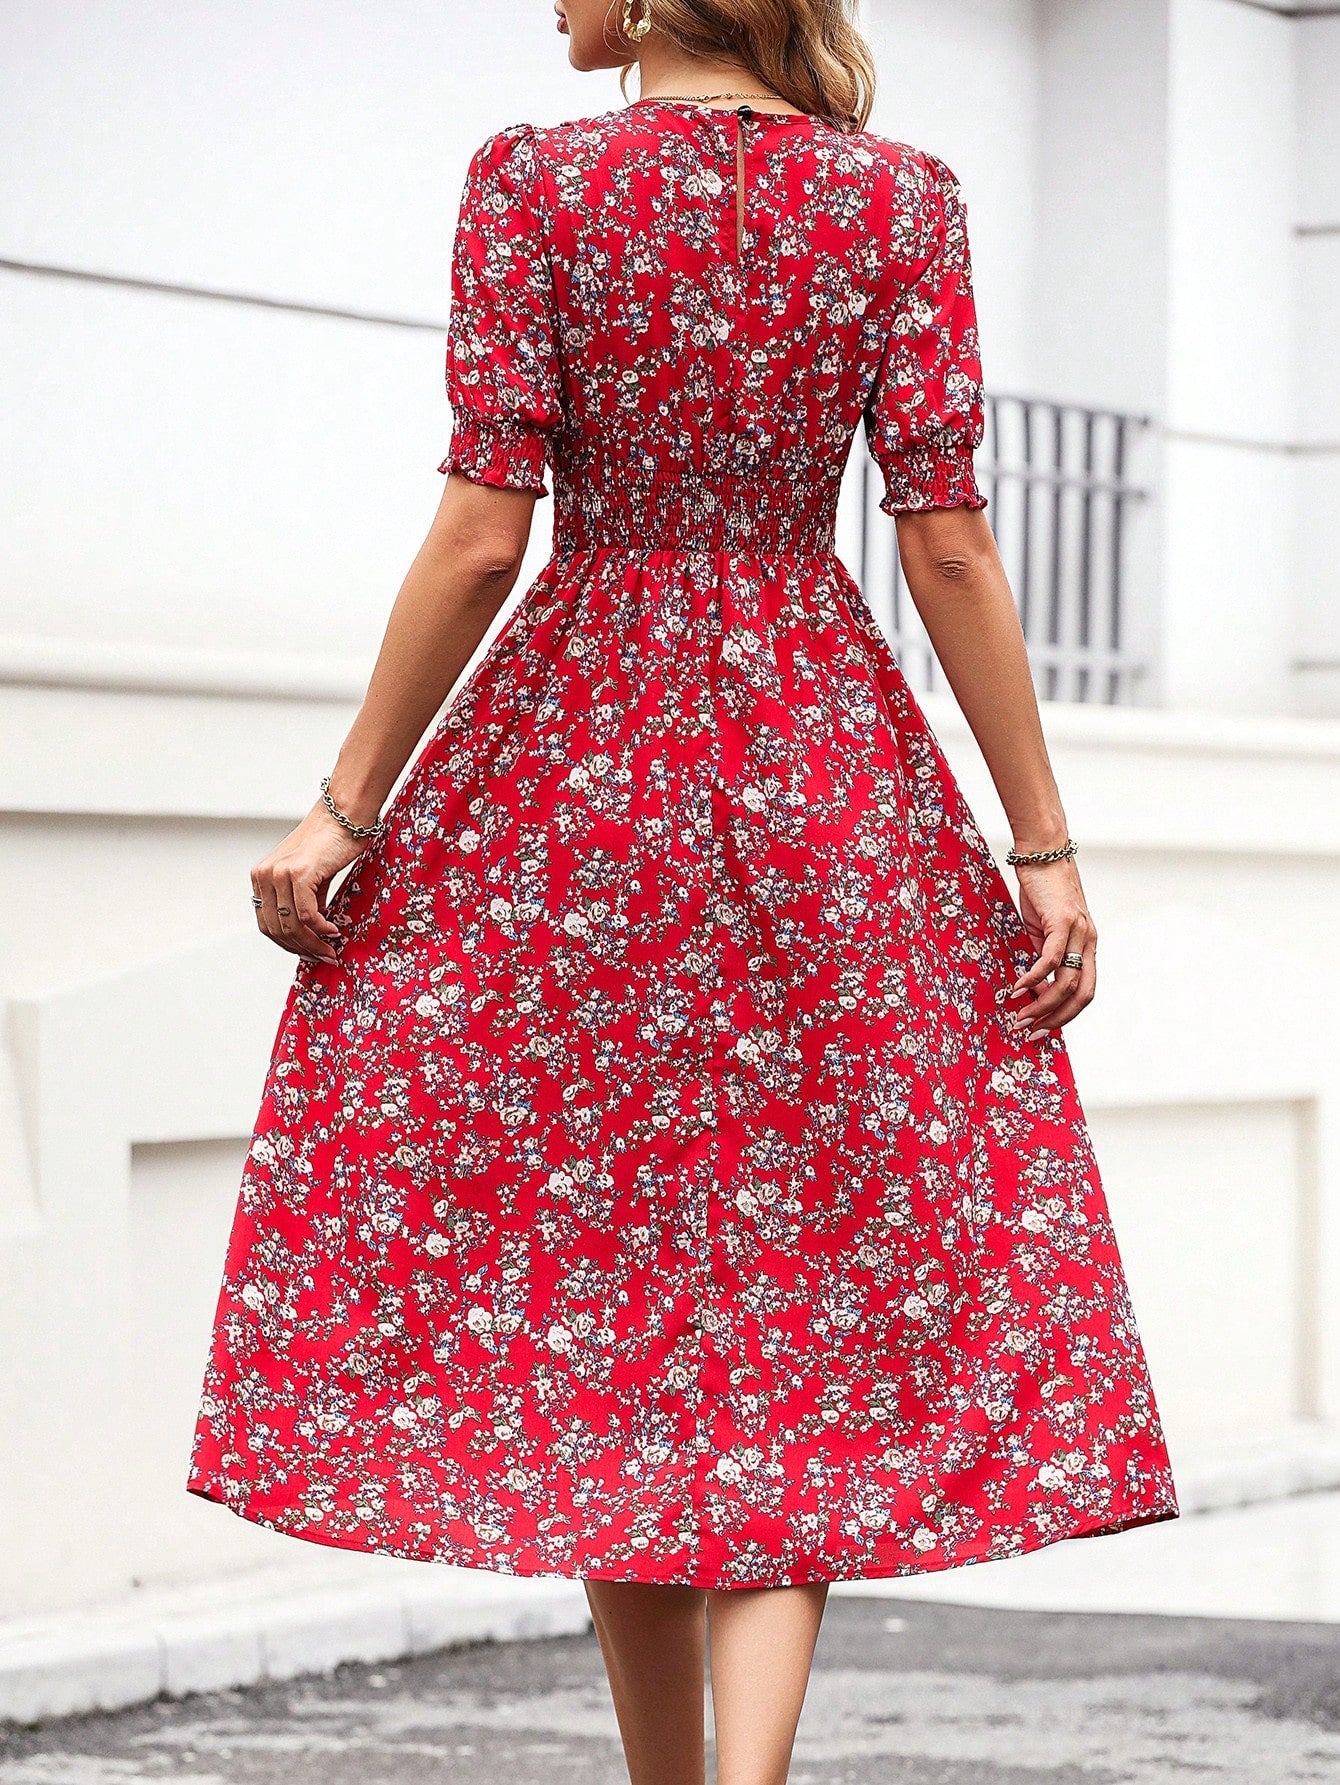 SHEIN NEWNESS Floral Print Puff Sleeve Belted Dress